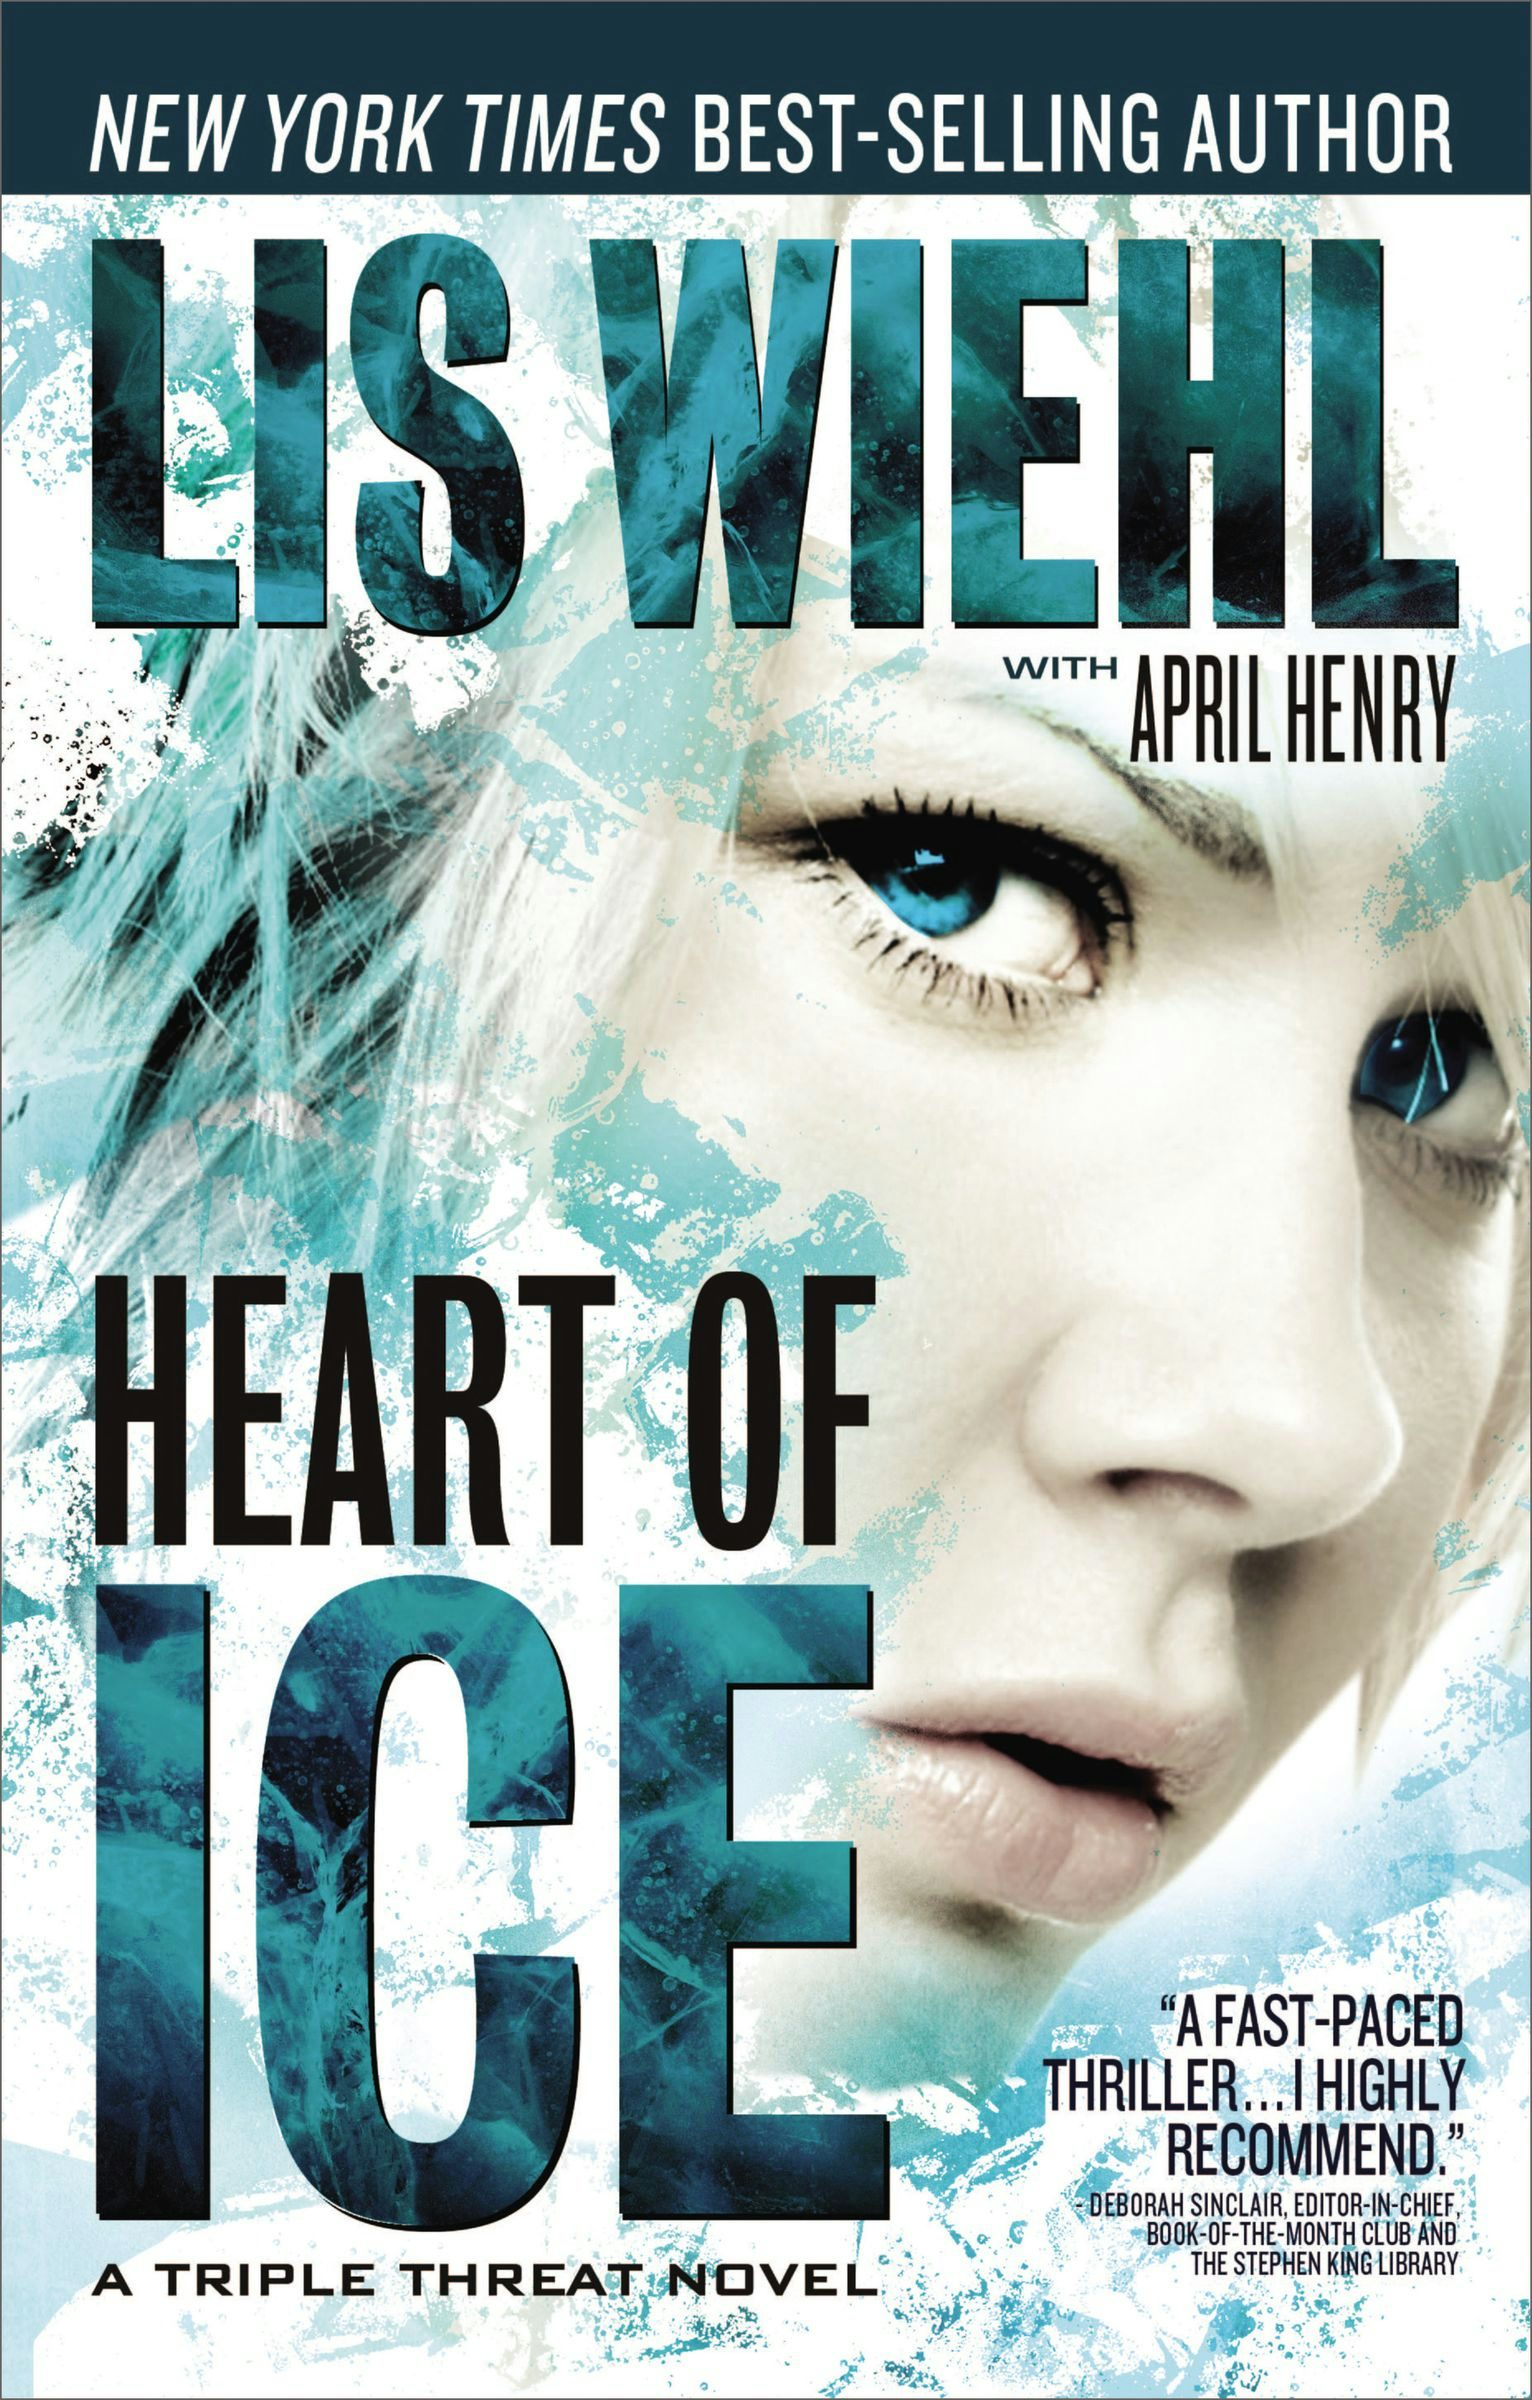 Hearts of Ice by Adi Rule